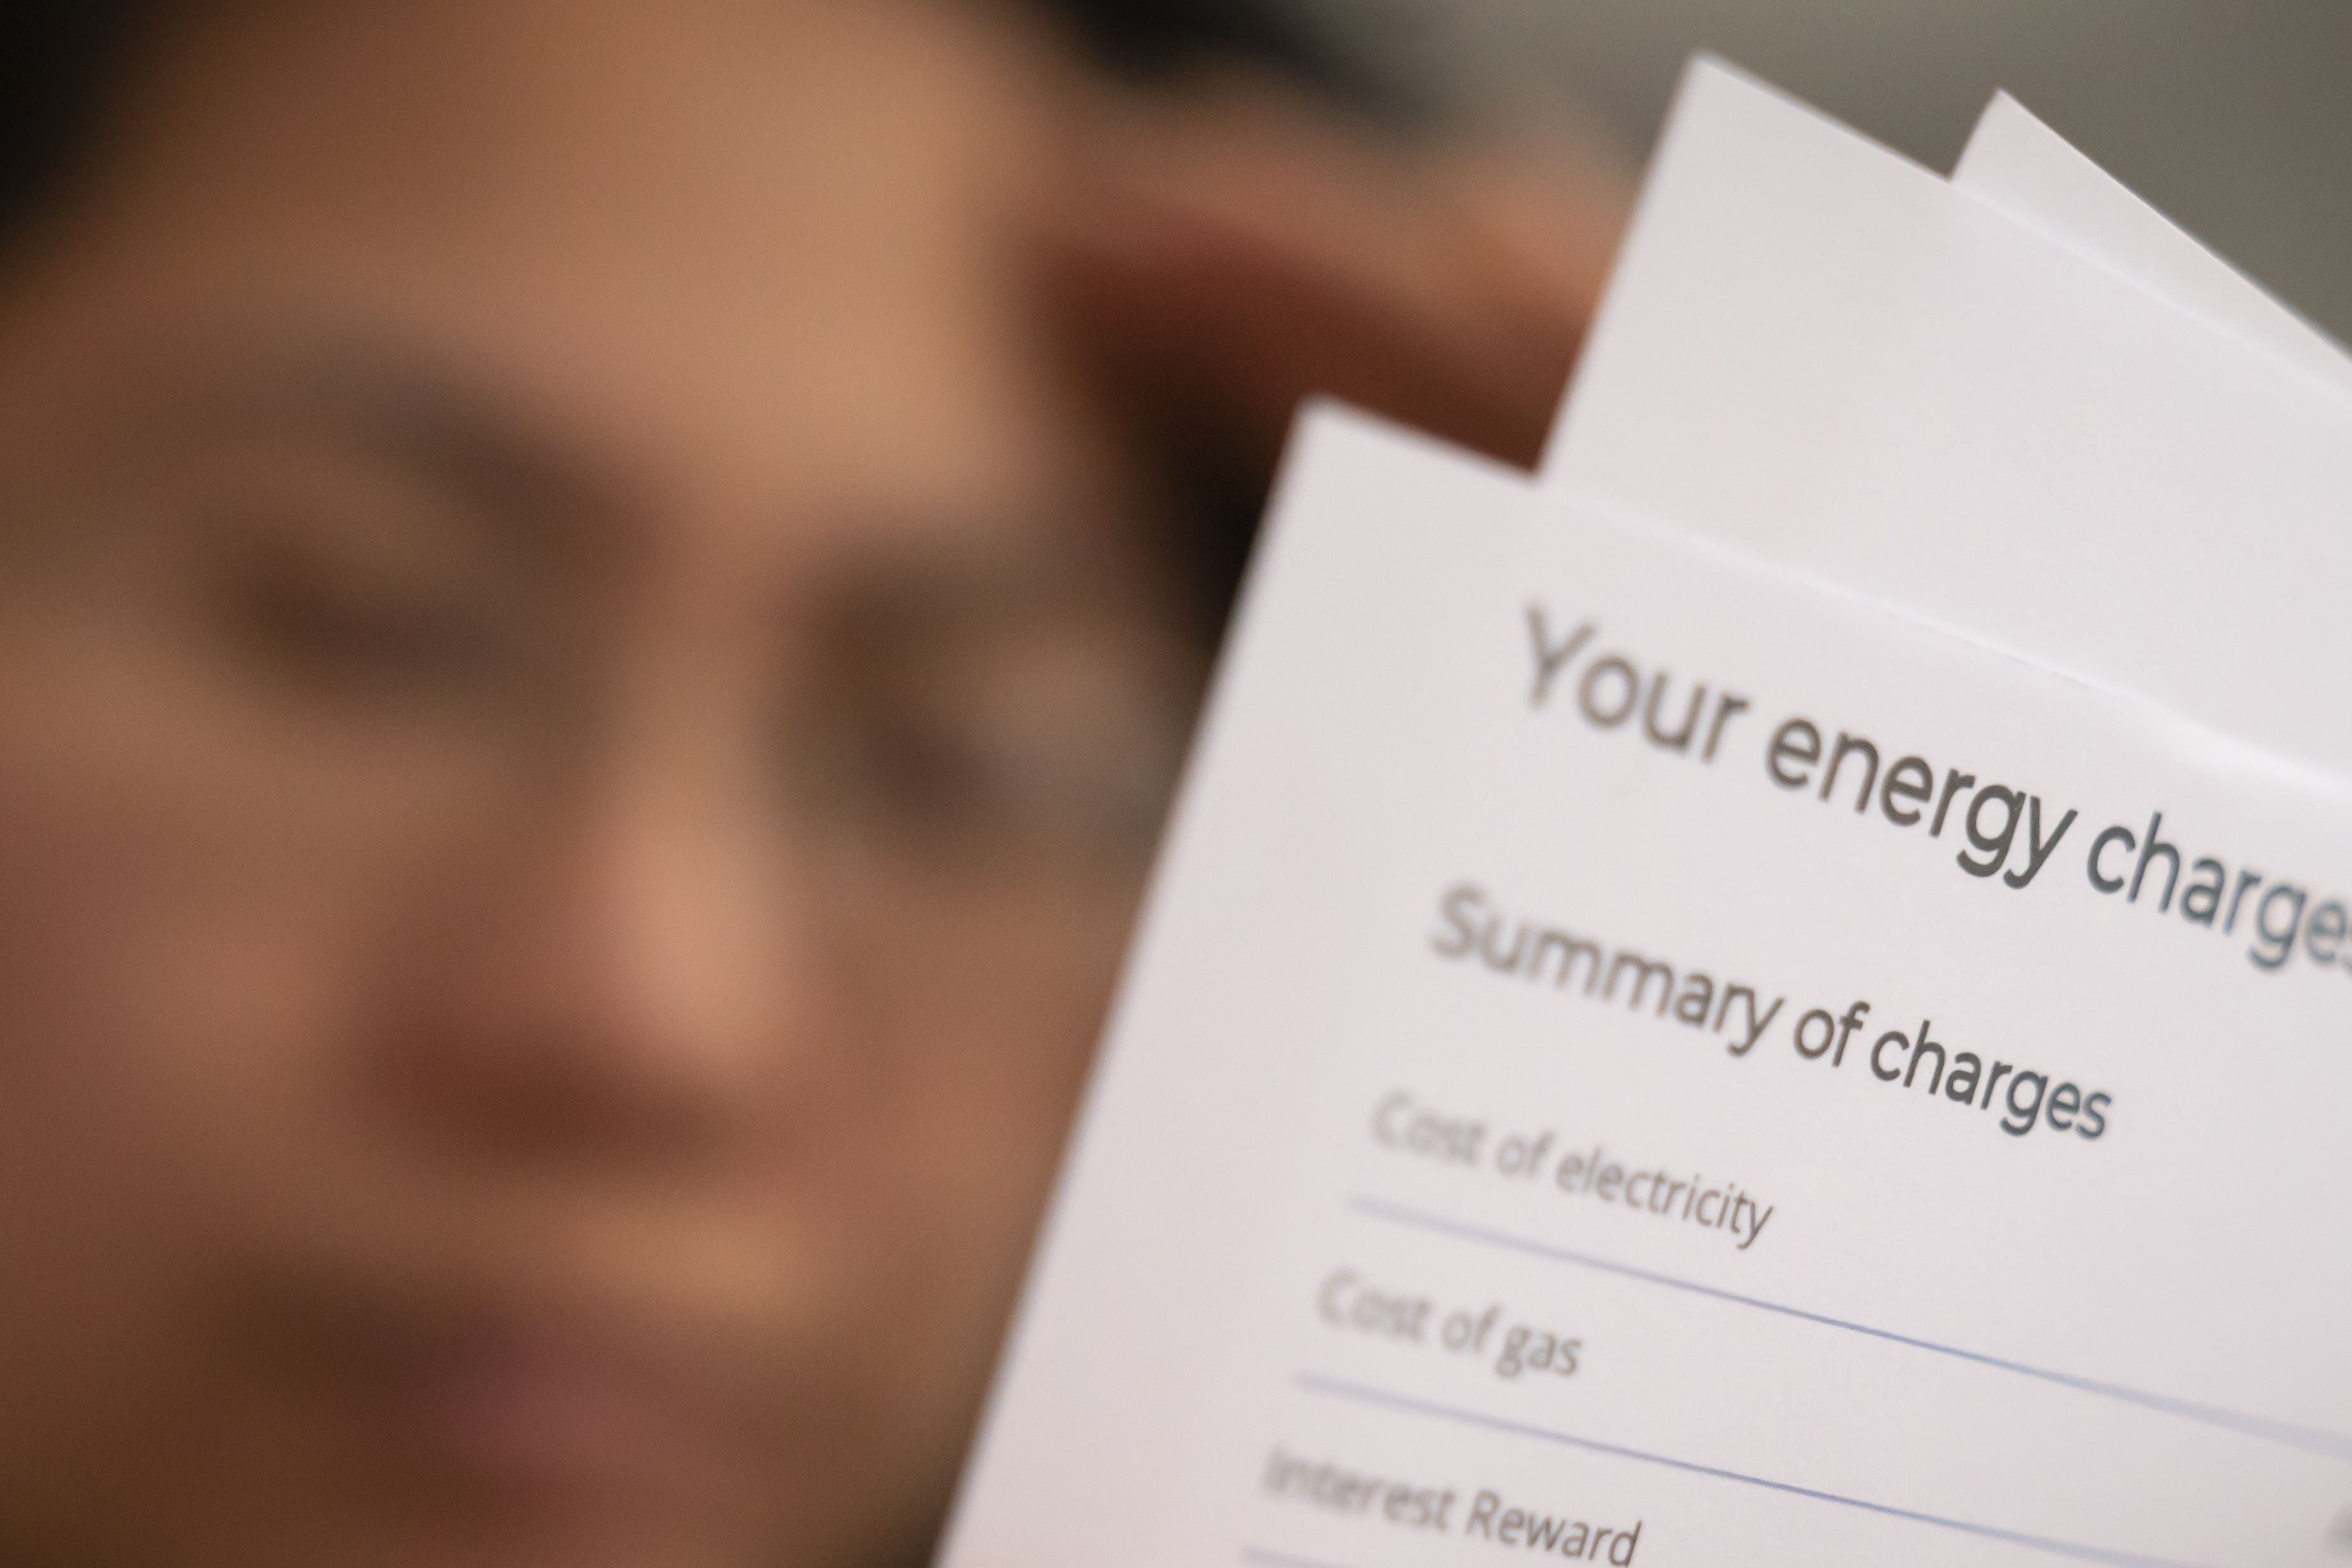 Only around a quarter of the Government’s energy bills vouchers have been claimed in December, as postal strikes have left households across the country waiting on payments amid plunging temperatures (Danny Lawson/ PA)